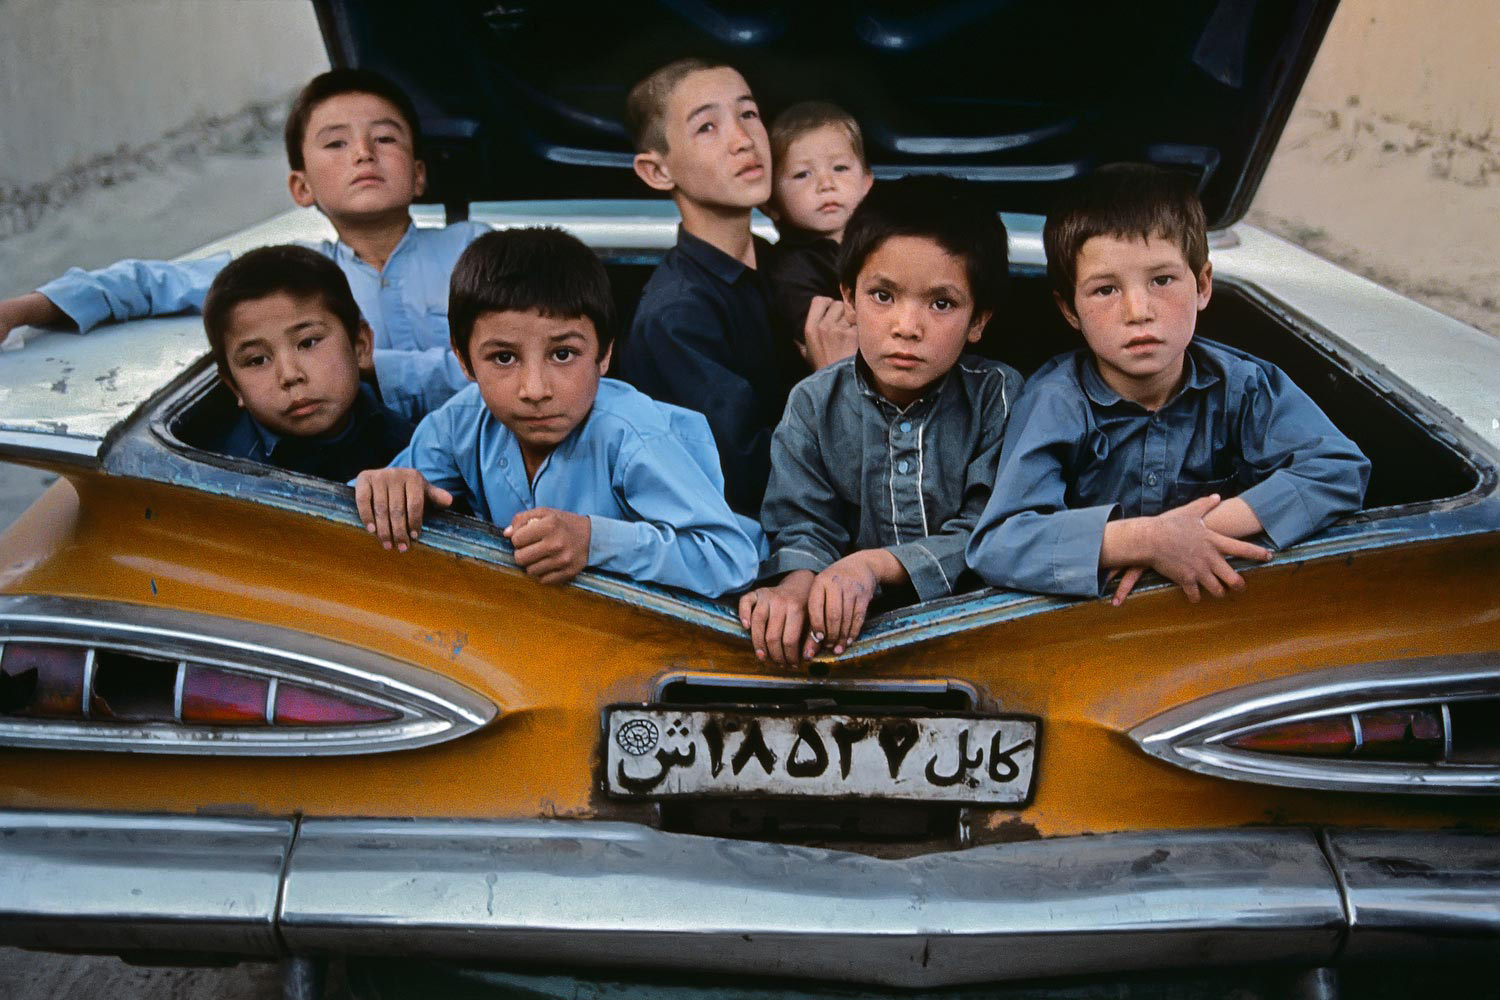 Boys in the boot of a taxi, Kabul, Afghanistan, 1992
                              
                              
                              Concerned about the plight of the Hazara people of Afghanistan, McCurry helped establish a non-profit called ImagineAsia. ‘It’s an attempt to get warm clothes, textbooks, pencils and notebooks to the Bamiyan region of Afghanistan, where the Hazara people live. Maybe most significantly, we’ve helped to set up classes for children and their mothers in Kabul. In addition, ImagineAsia has sponsored a young Hazara woman who is studying for a university degree in the United States.’